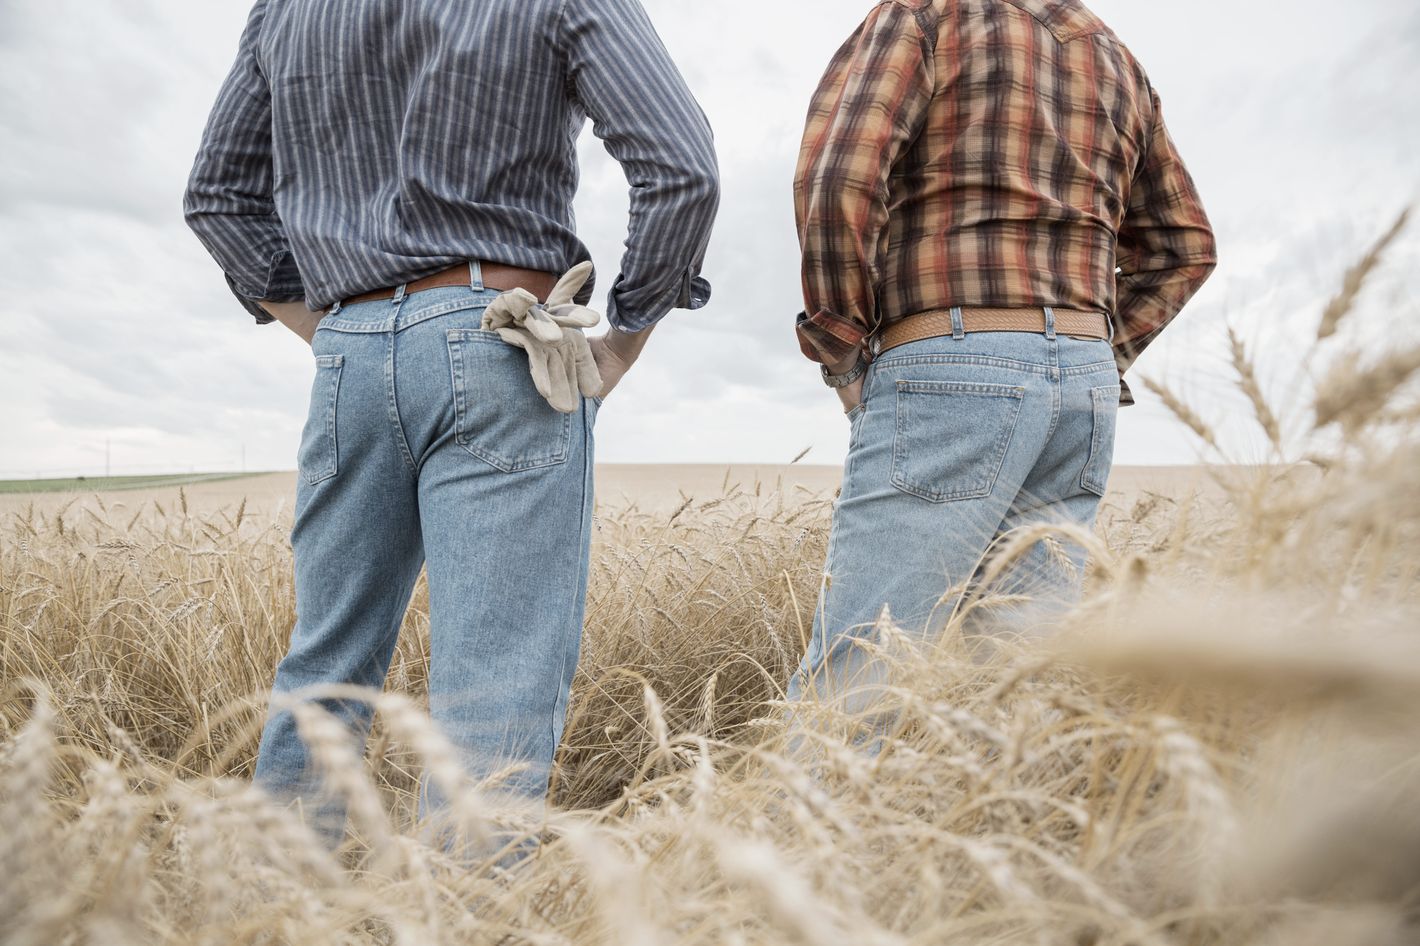 Why Straight Rural Men Have Gay Bud-Sex With Each Other -- Science of Us pic